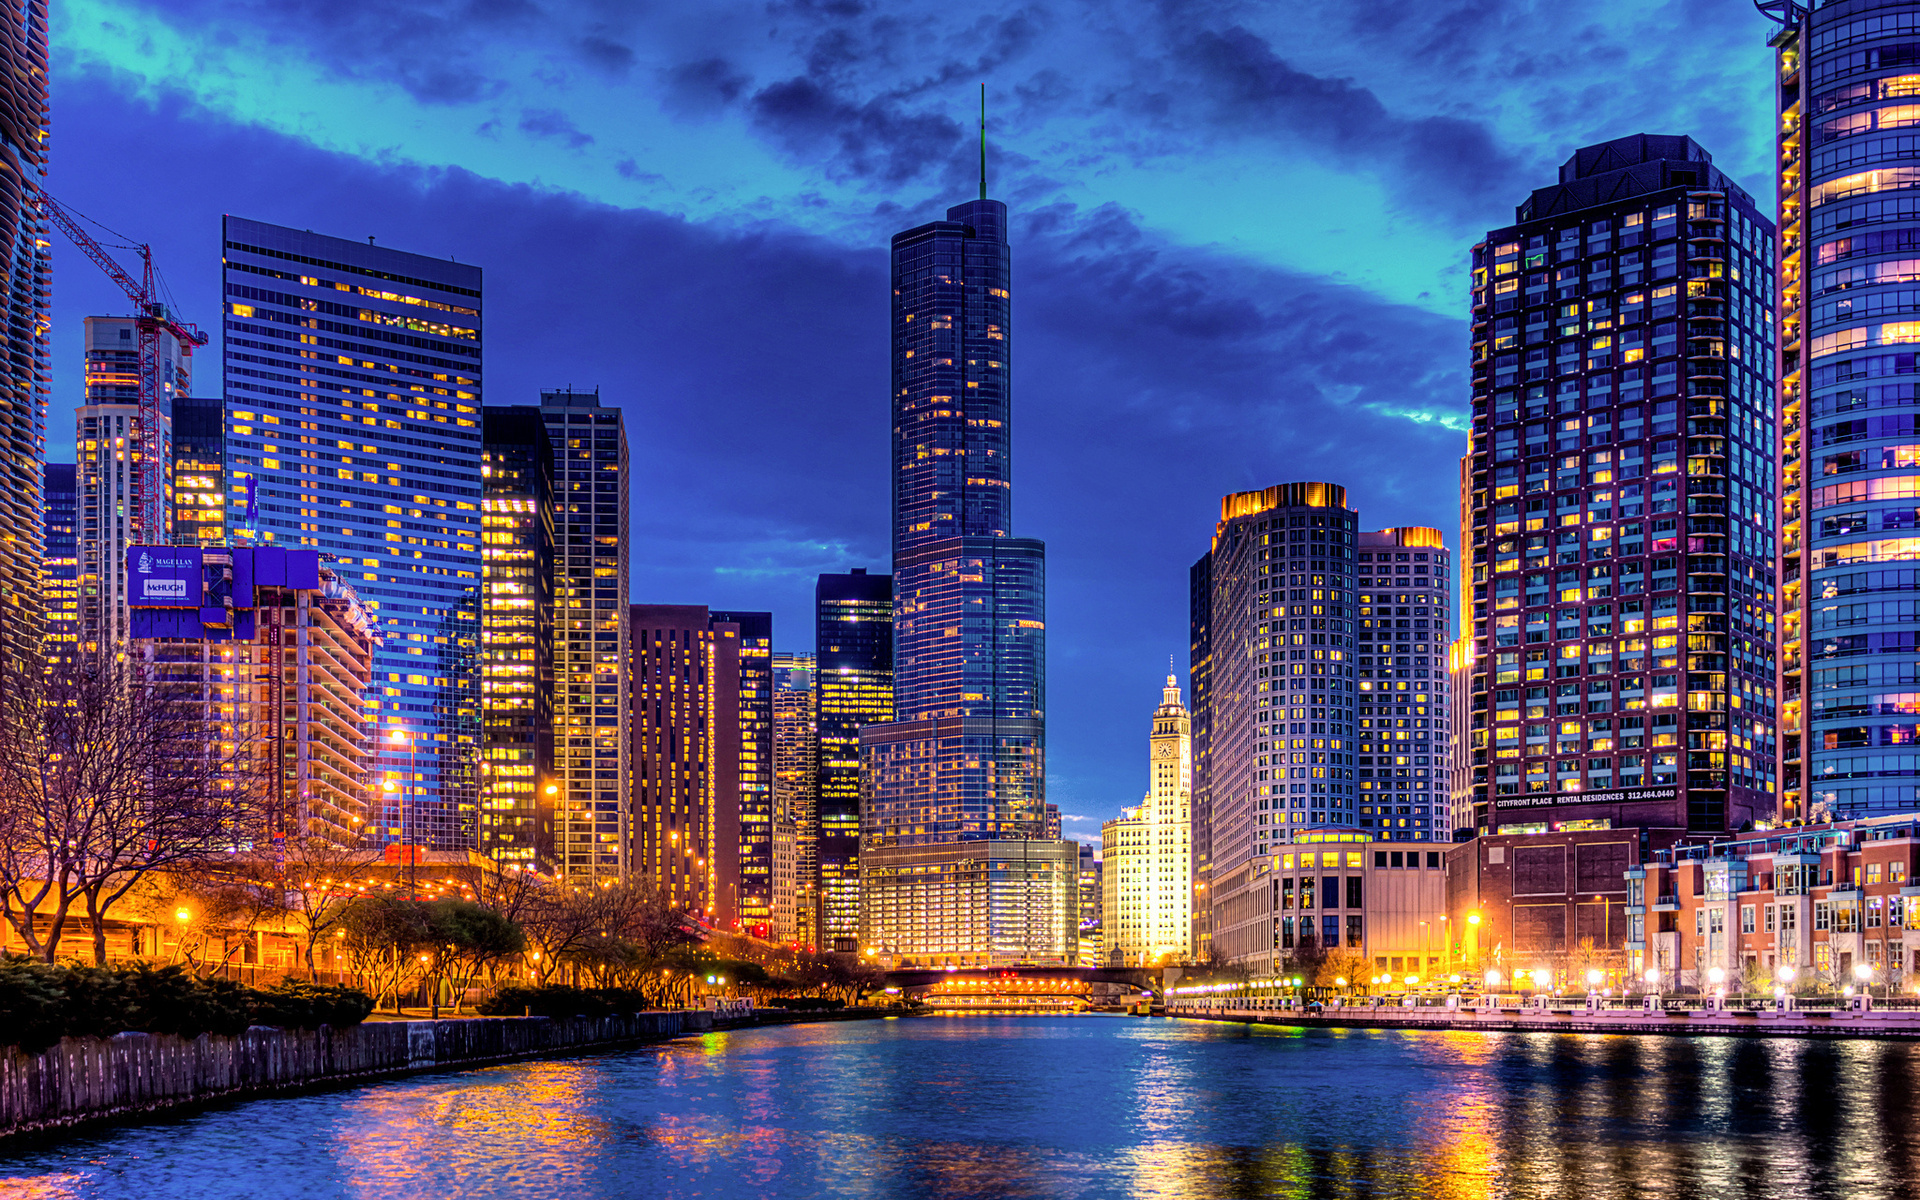 streeterville, Trump, Tower, Chicago, Illinois, Usa, Architecture, Cities, Buildings, Skyscrapers, Night, Lights, Rivers, Reflection, Sky, Clouds Wallpaper